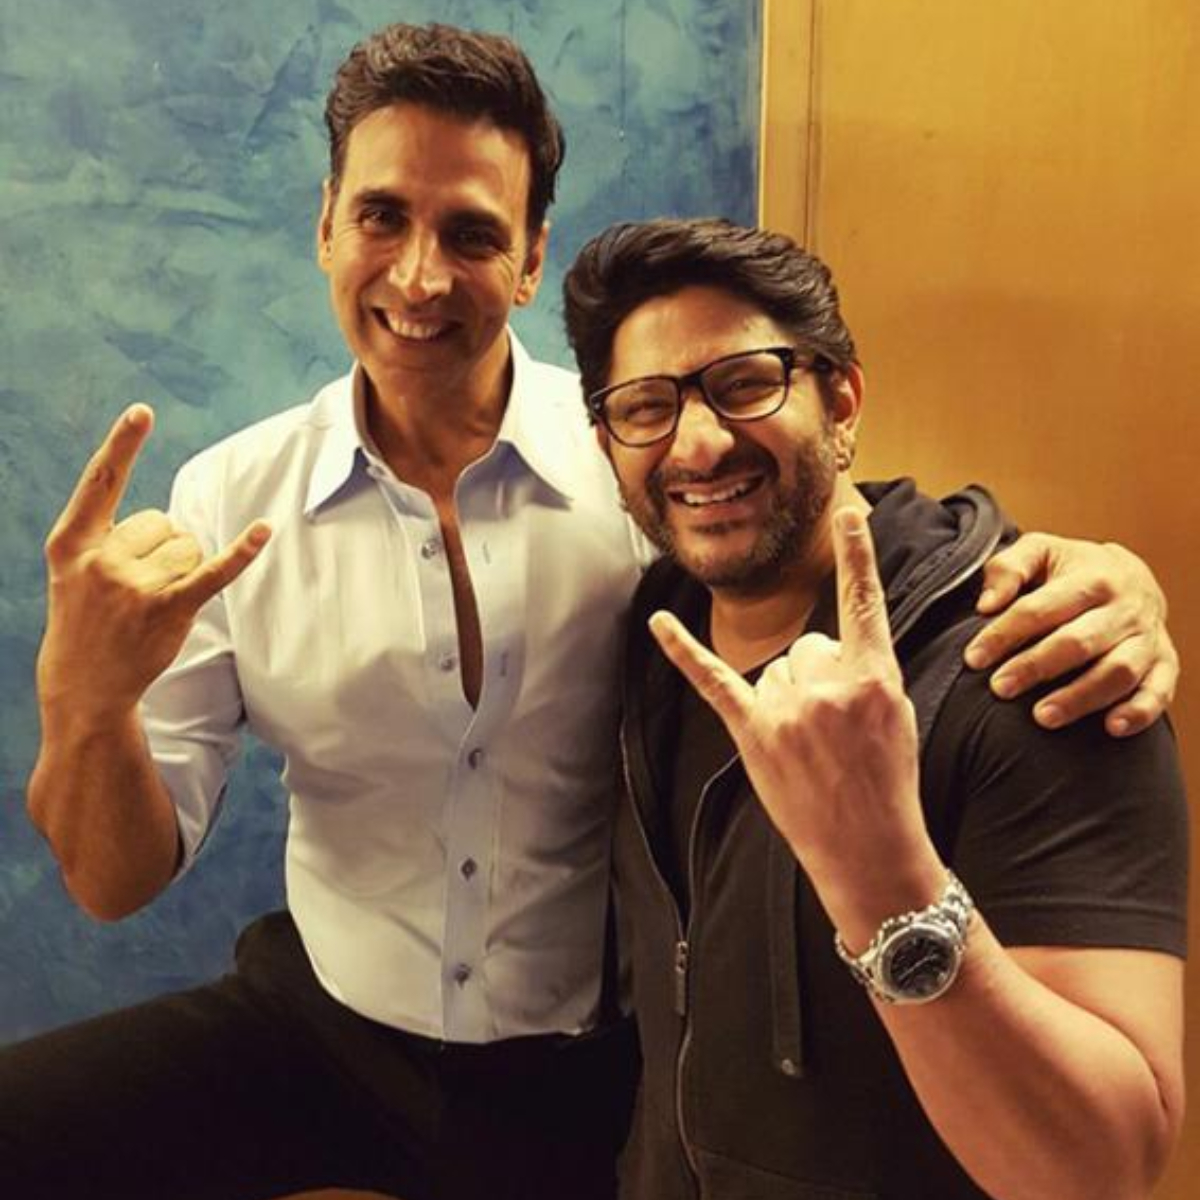 EXCLUSIVE: Arshad Warsi teases Akshay Kumar starrer Bachchan Pandey is a package of action, laughs, & emotions